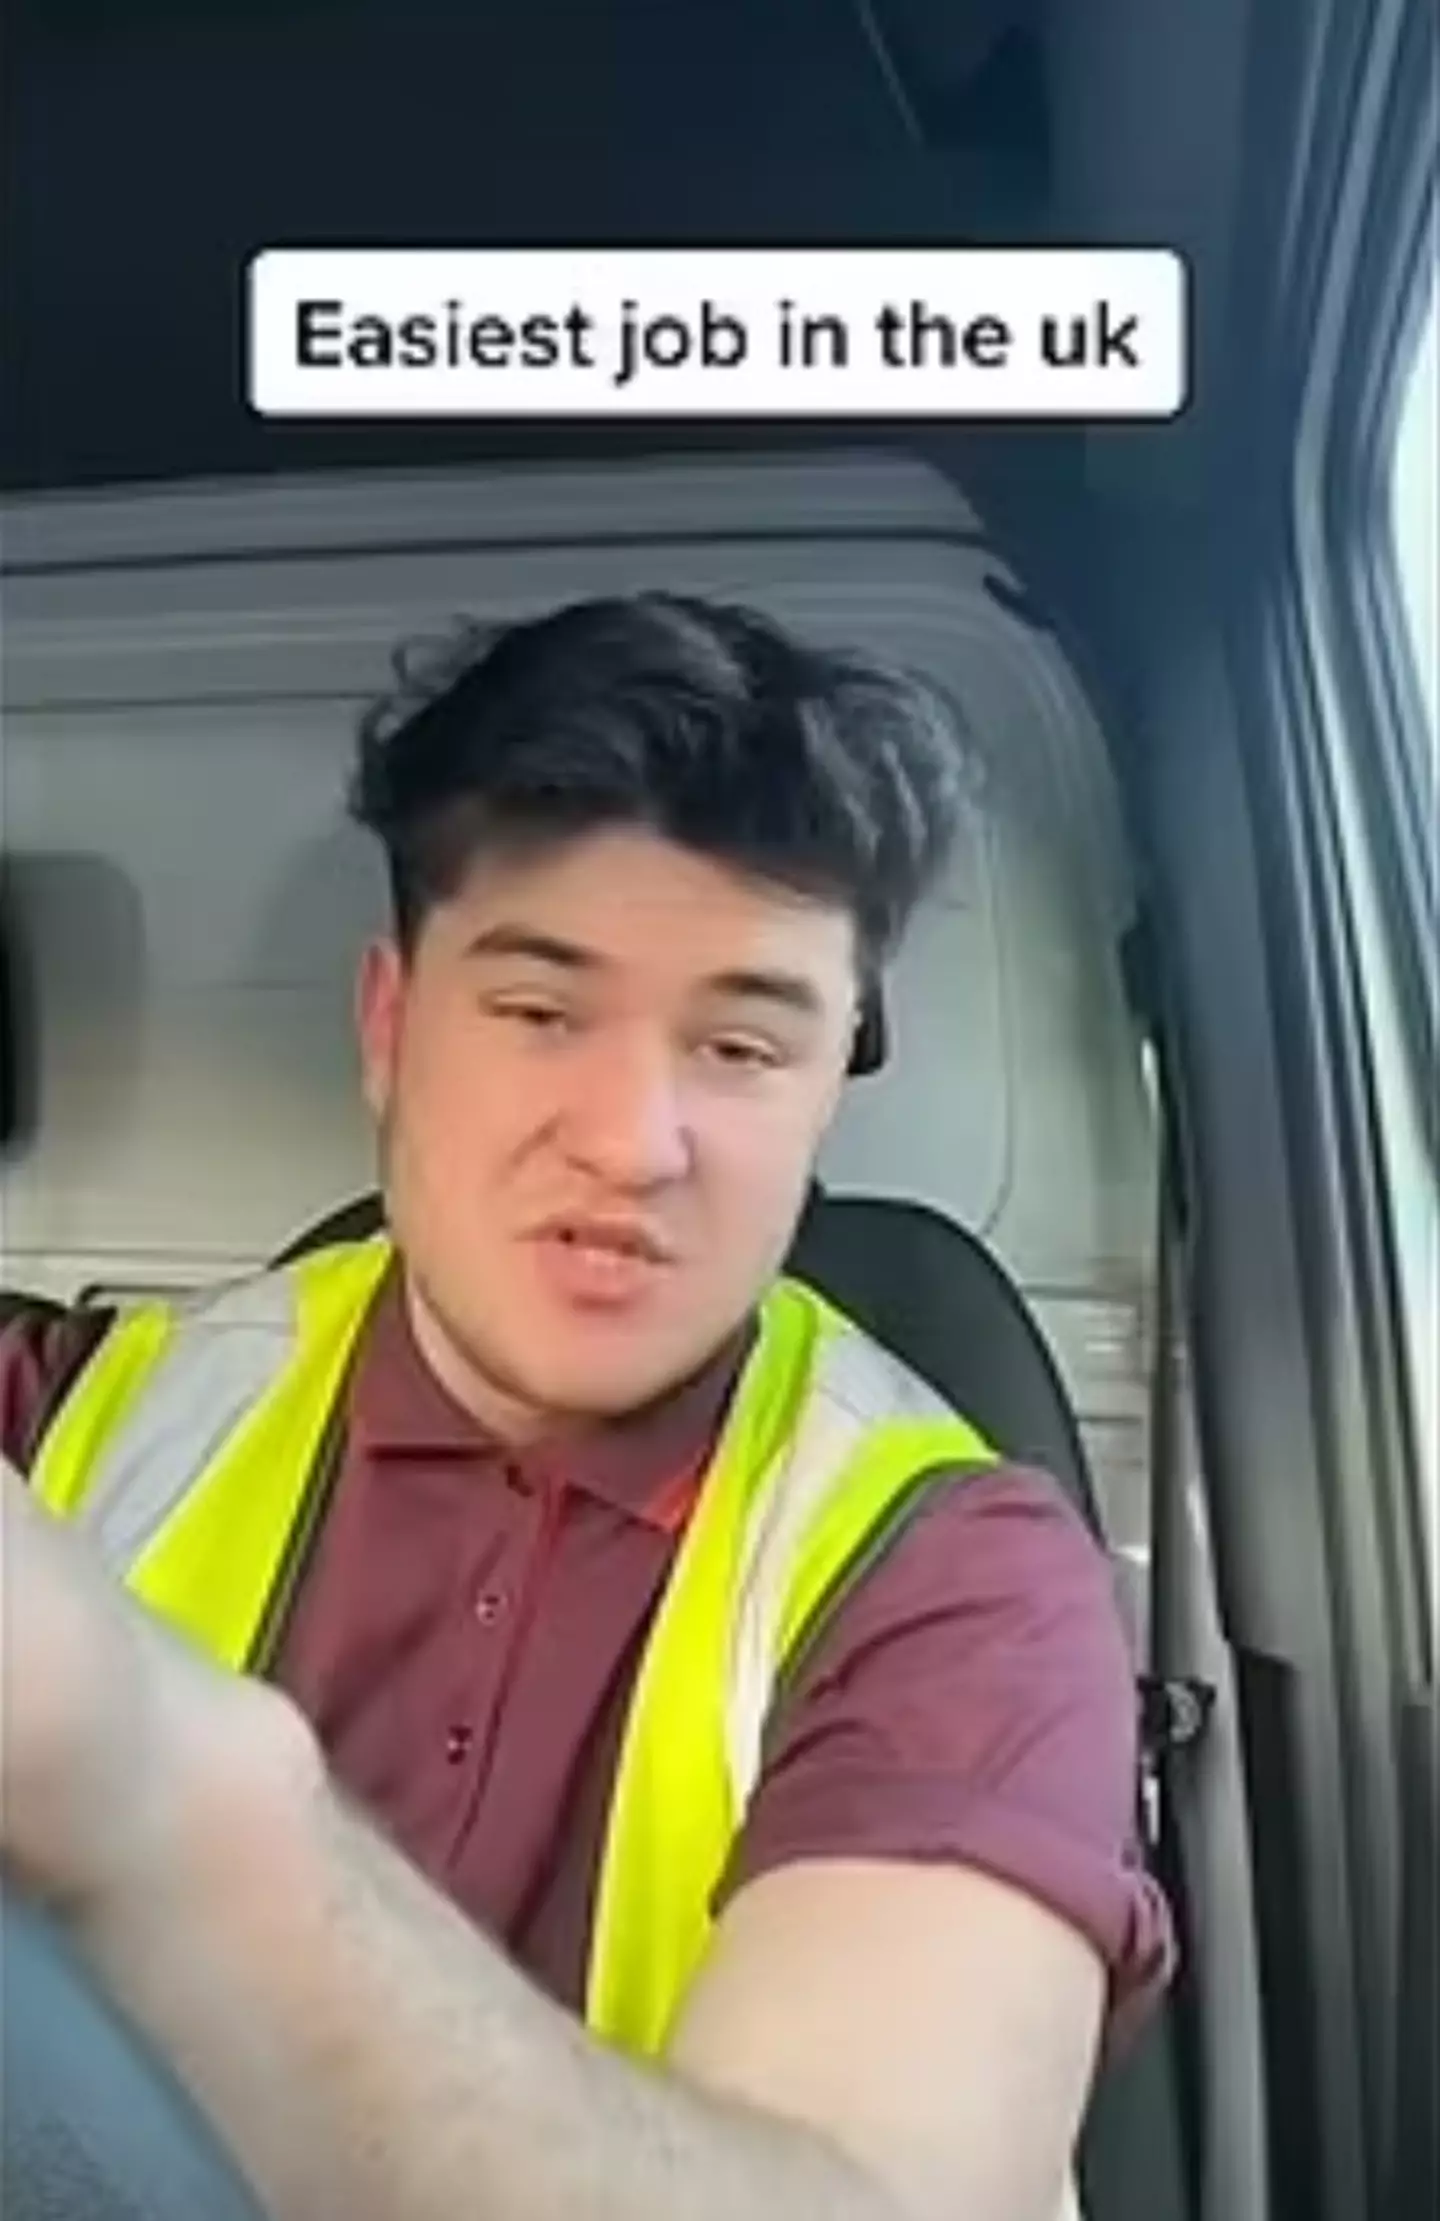 Ollie Tutt lost his job after posting a viral TikTok about how much he enjoyed working as a Sainsbury's delivery driver.